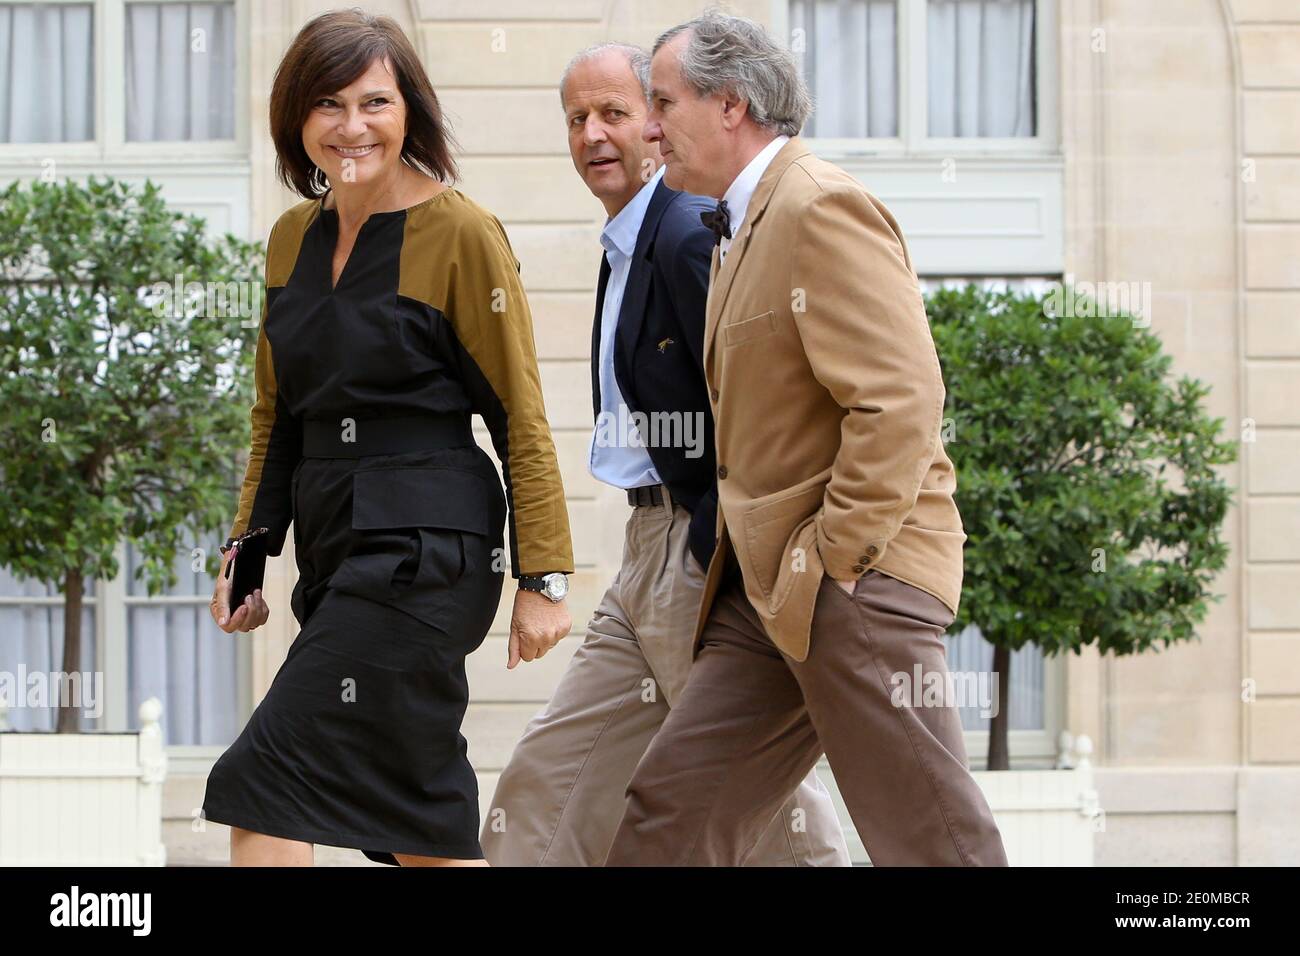 French Junior Minister for Disabled People Marie-Arlette Carlotti arrives for a ceremony with France's President Francois Hollande at Elysee Palace in Paris, France on September 17, 2012. Photo by Stephane Lemouton/ABACAPRESS.COM. Stock Photo